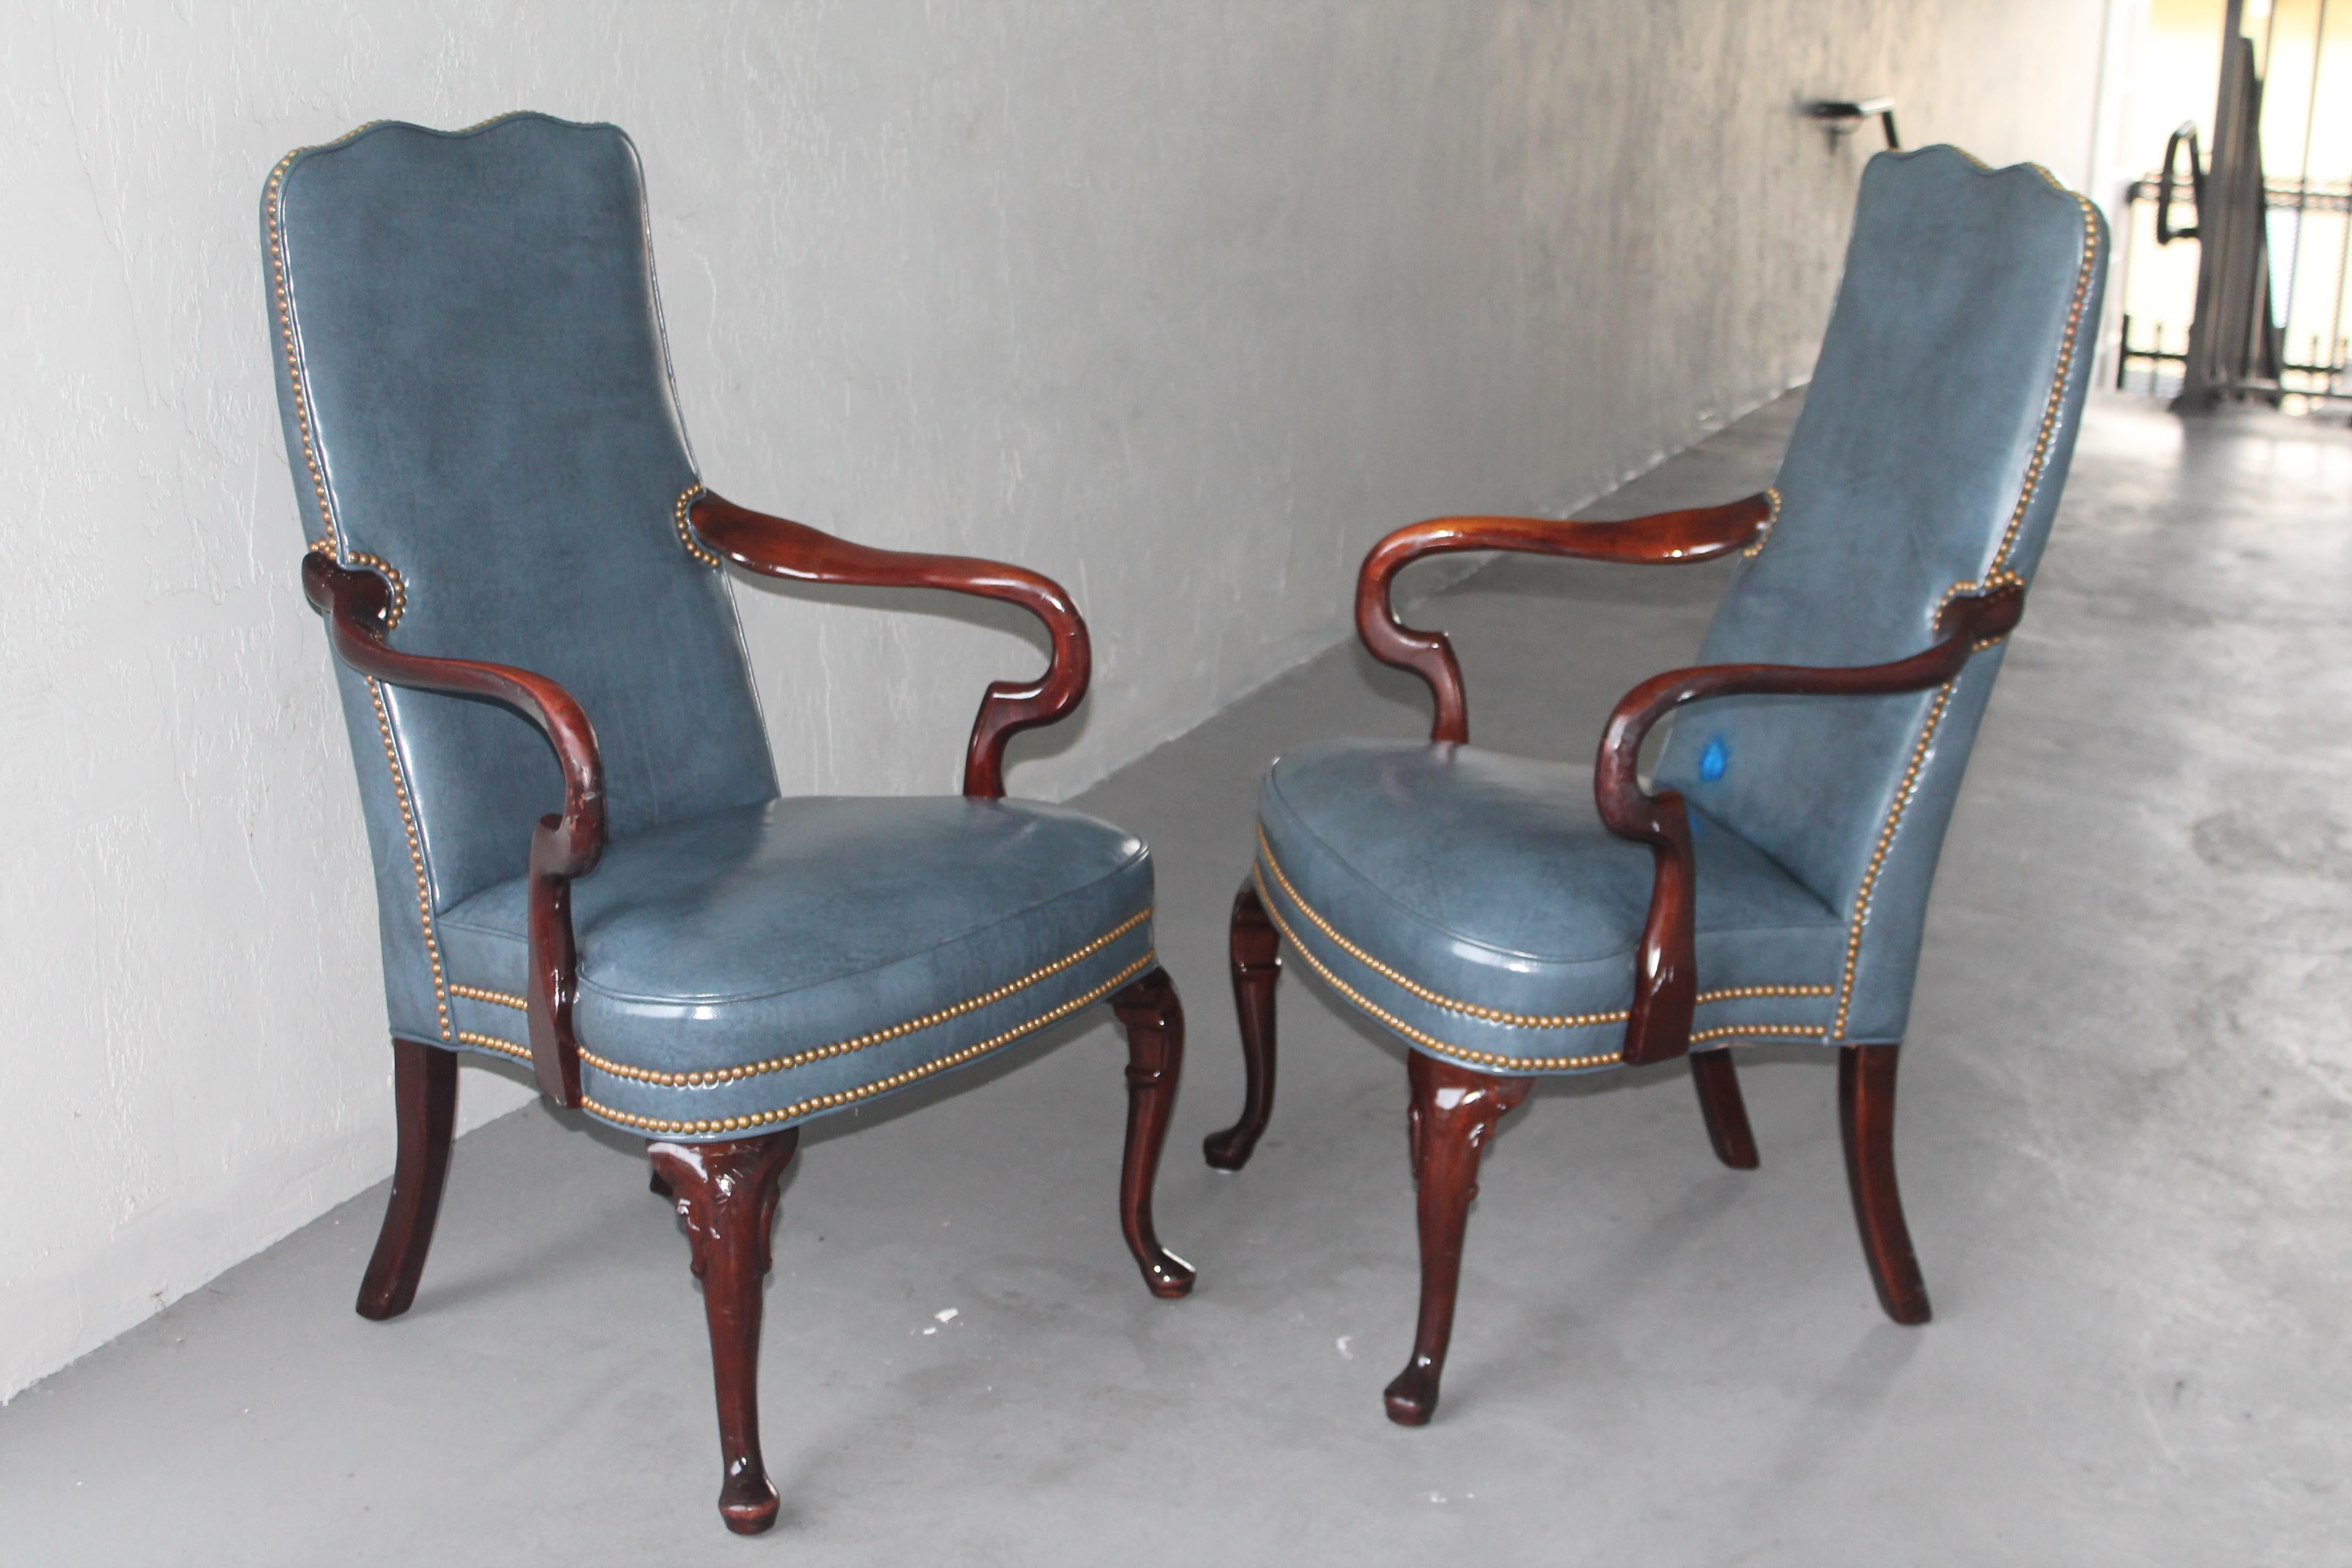 Pair Mid Century Modern Carved Wood and Blue Leather Parsons Chairs. Very unique and ultra high quality. The wood carving is exceptional and the blue leather is gorgeous! Miami Beach estate find.